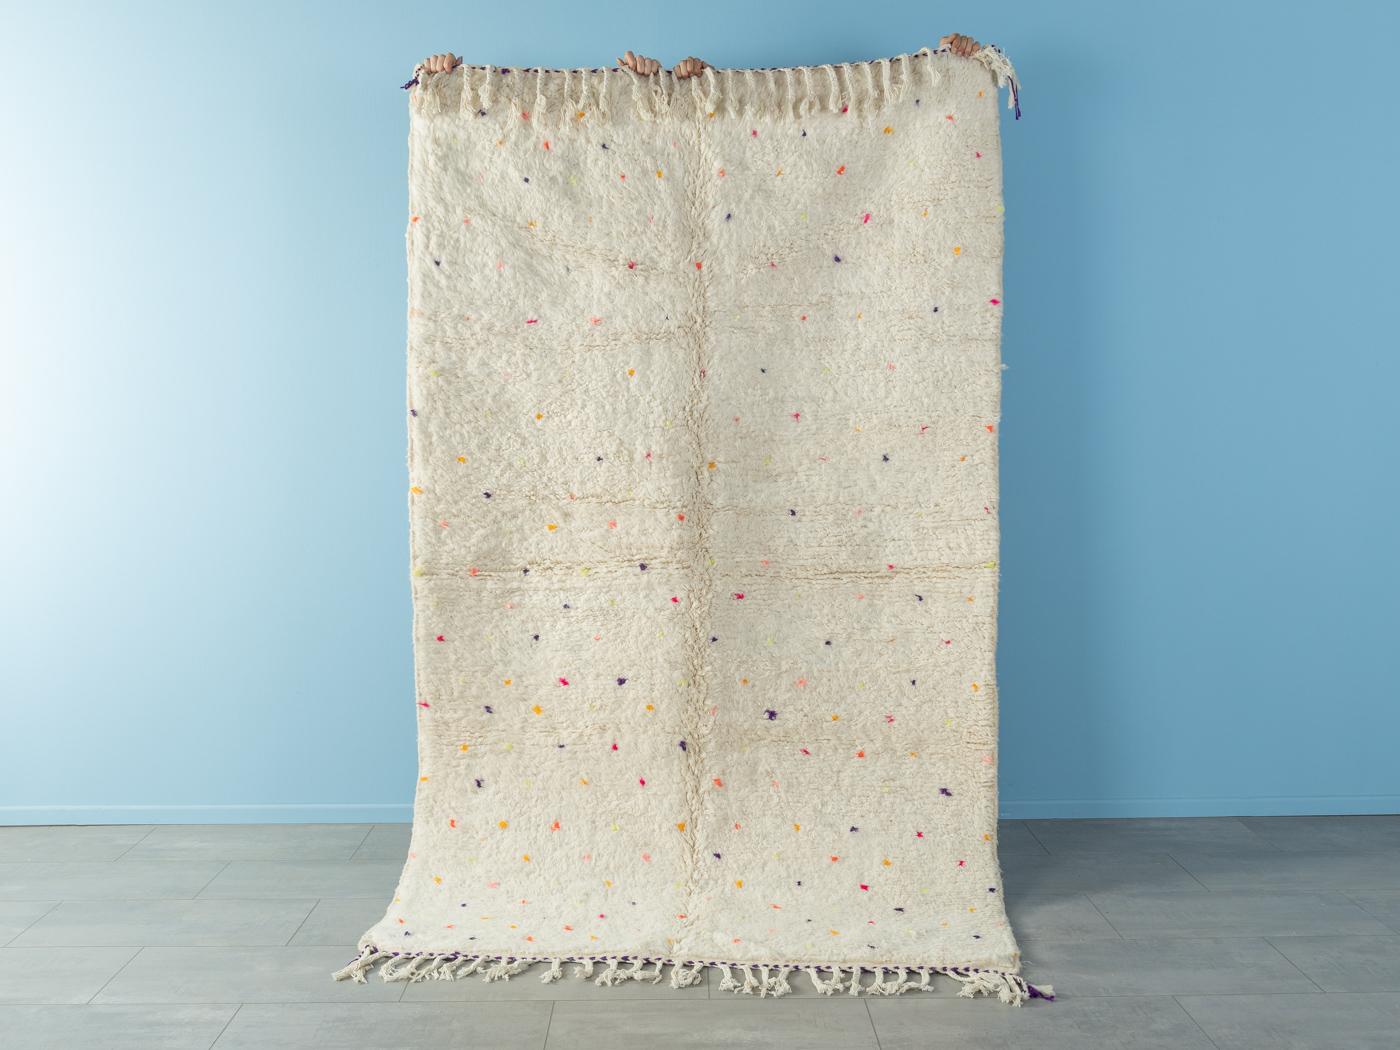 Tiny Polka Dots II is a contemporary 100% wool rug – thick and soft, comfortable underfoot. Our Berber rugs are handwoven and handknotted by Amazigh women in the Atlas Mountains. These communities have been crafting rugs for thousands of years. One